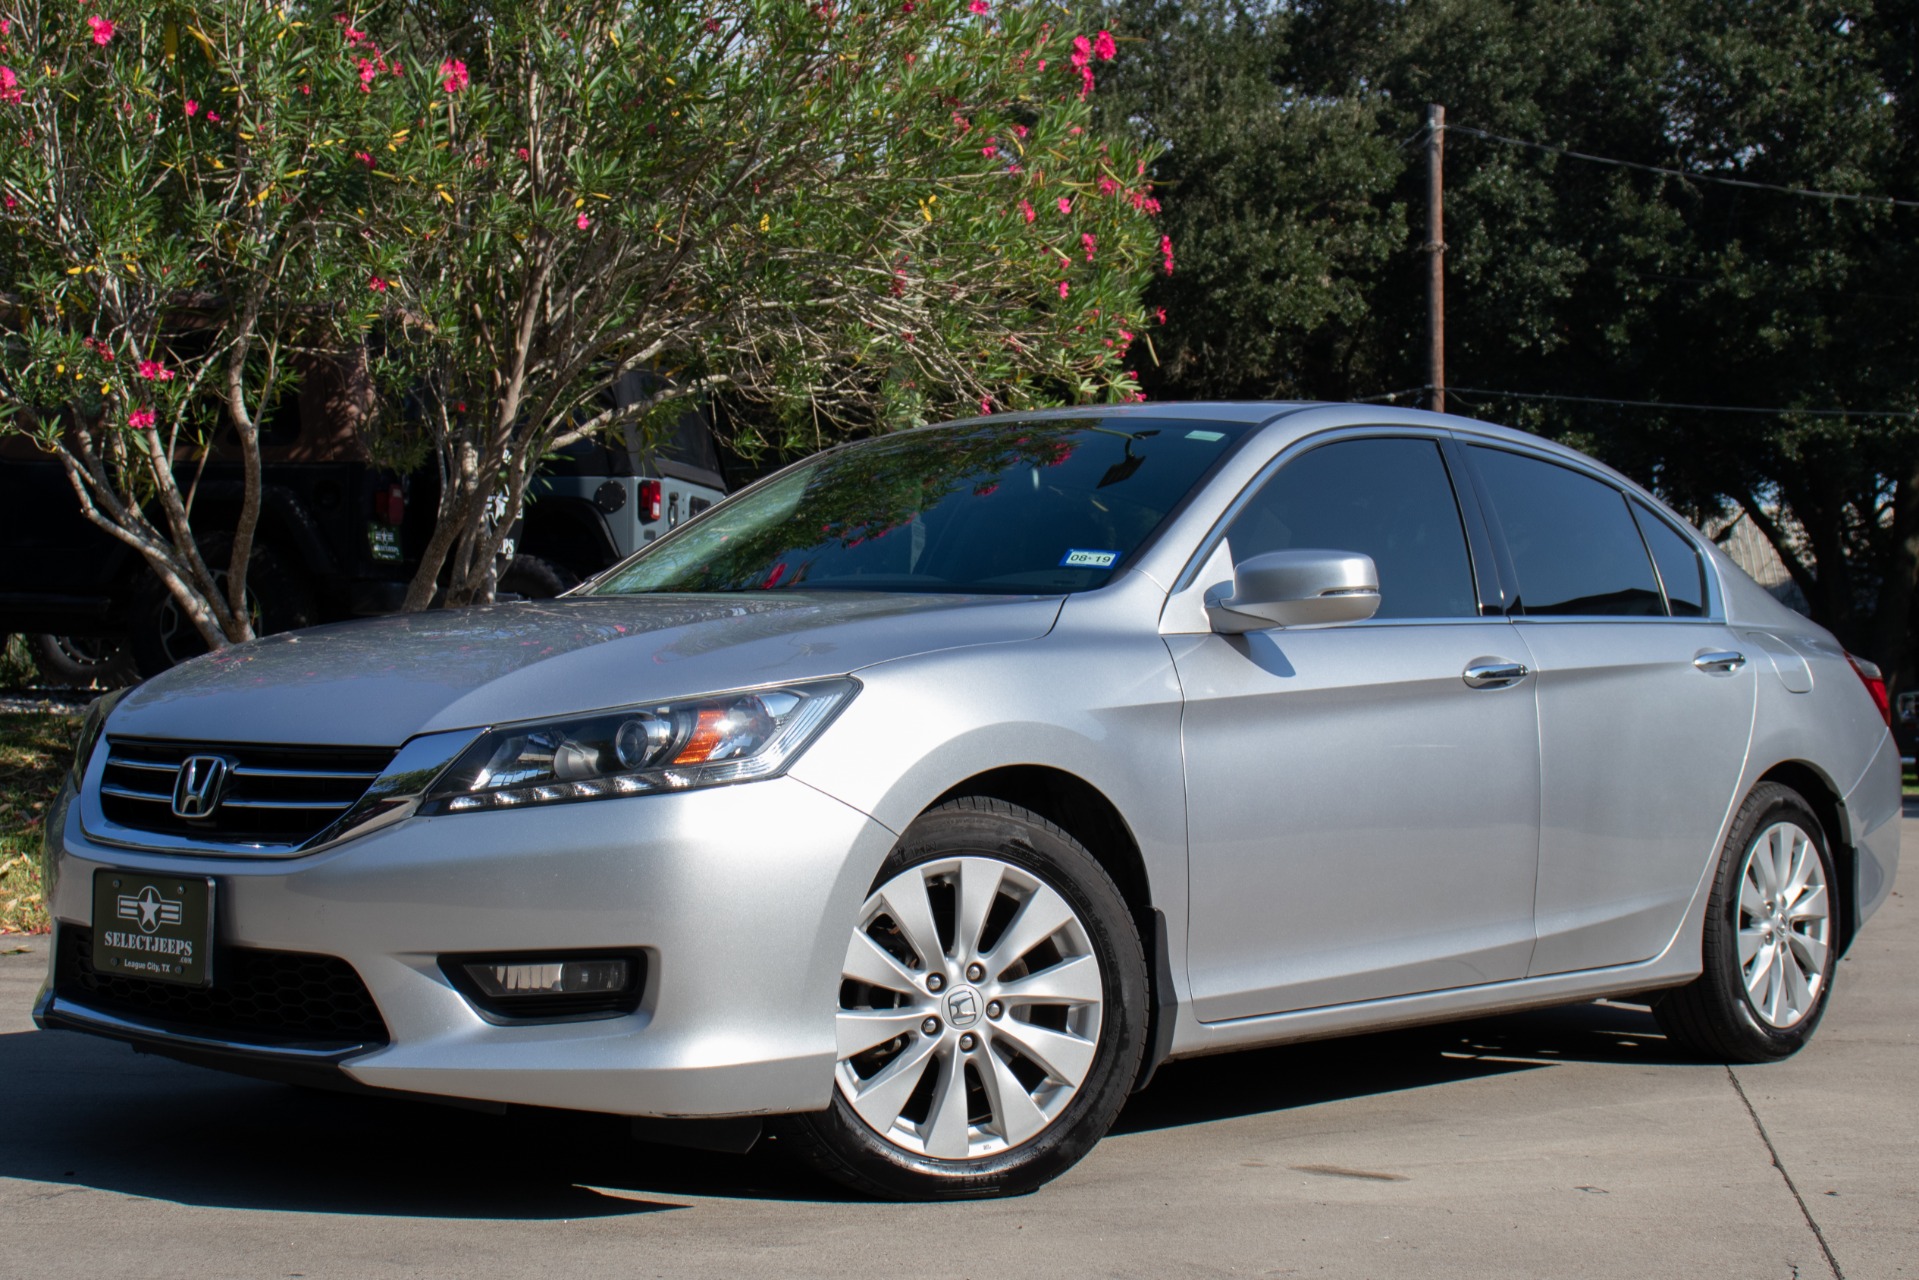 Used 2014 Honda Accord EX-L V6 For Sale ($15,995) | Select Jeeps Inc